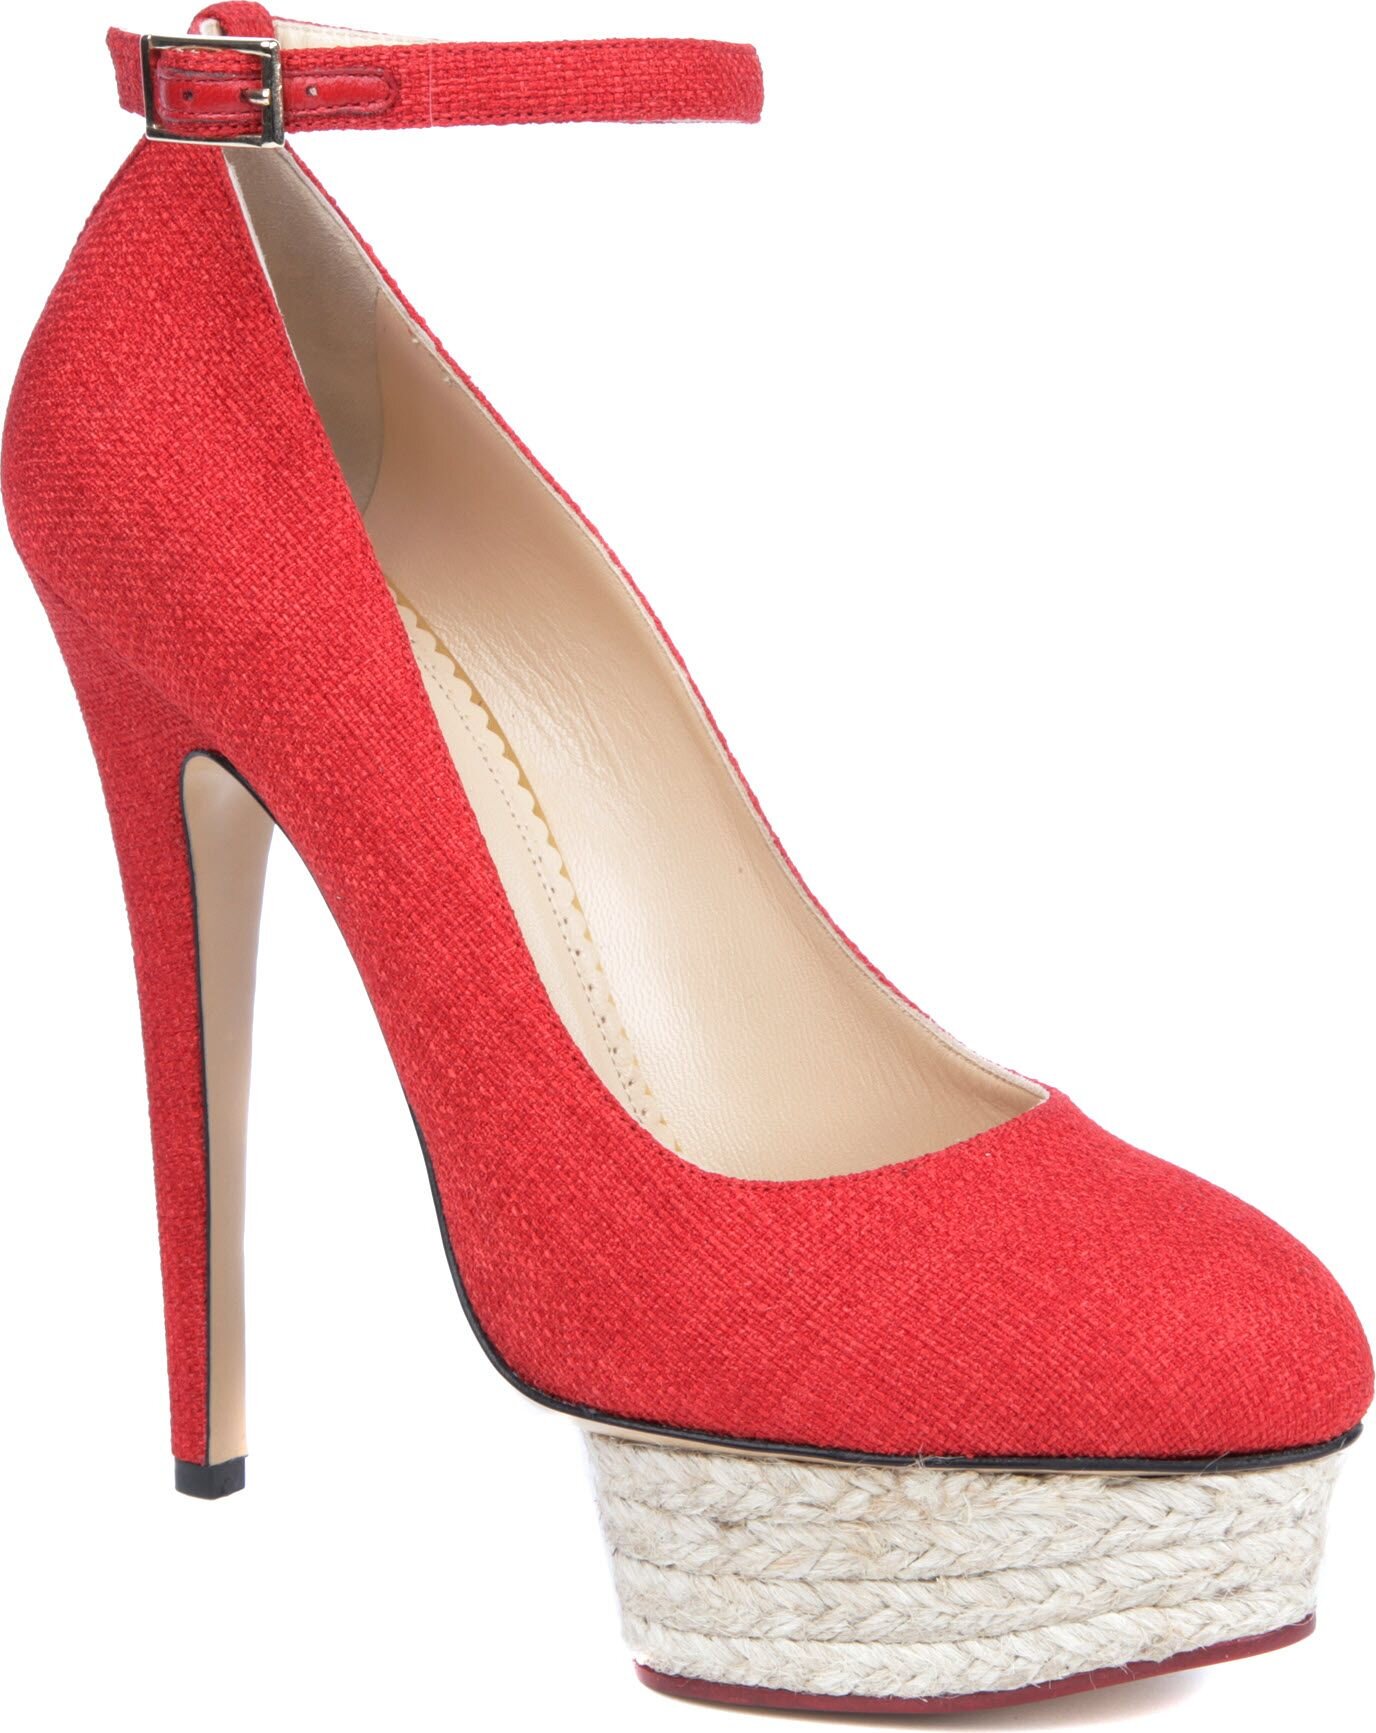 Charlotte Olympia Dolores Pumps in Red Canvas.jpg